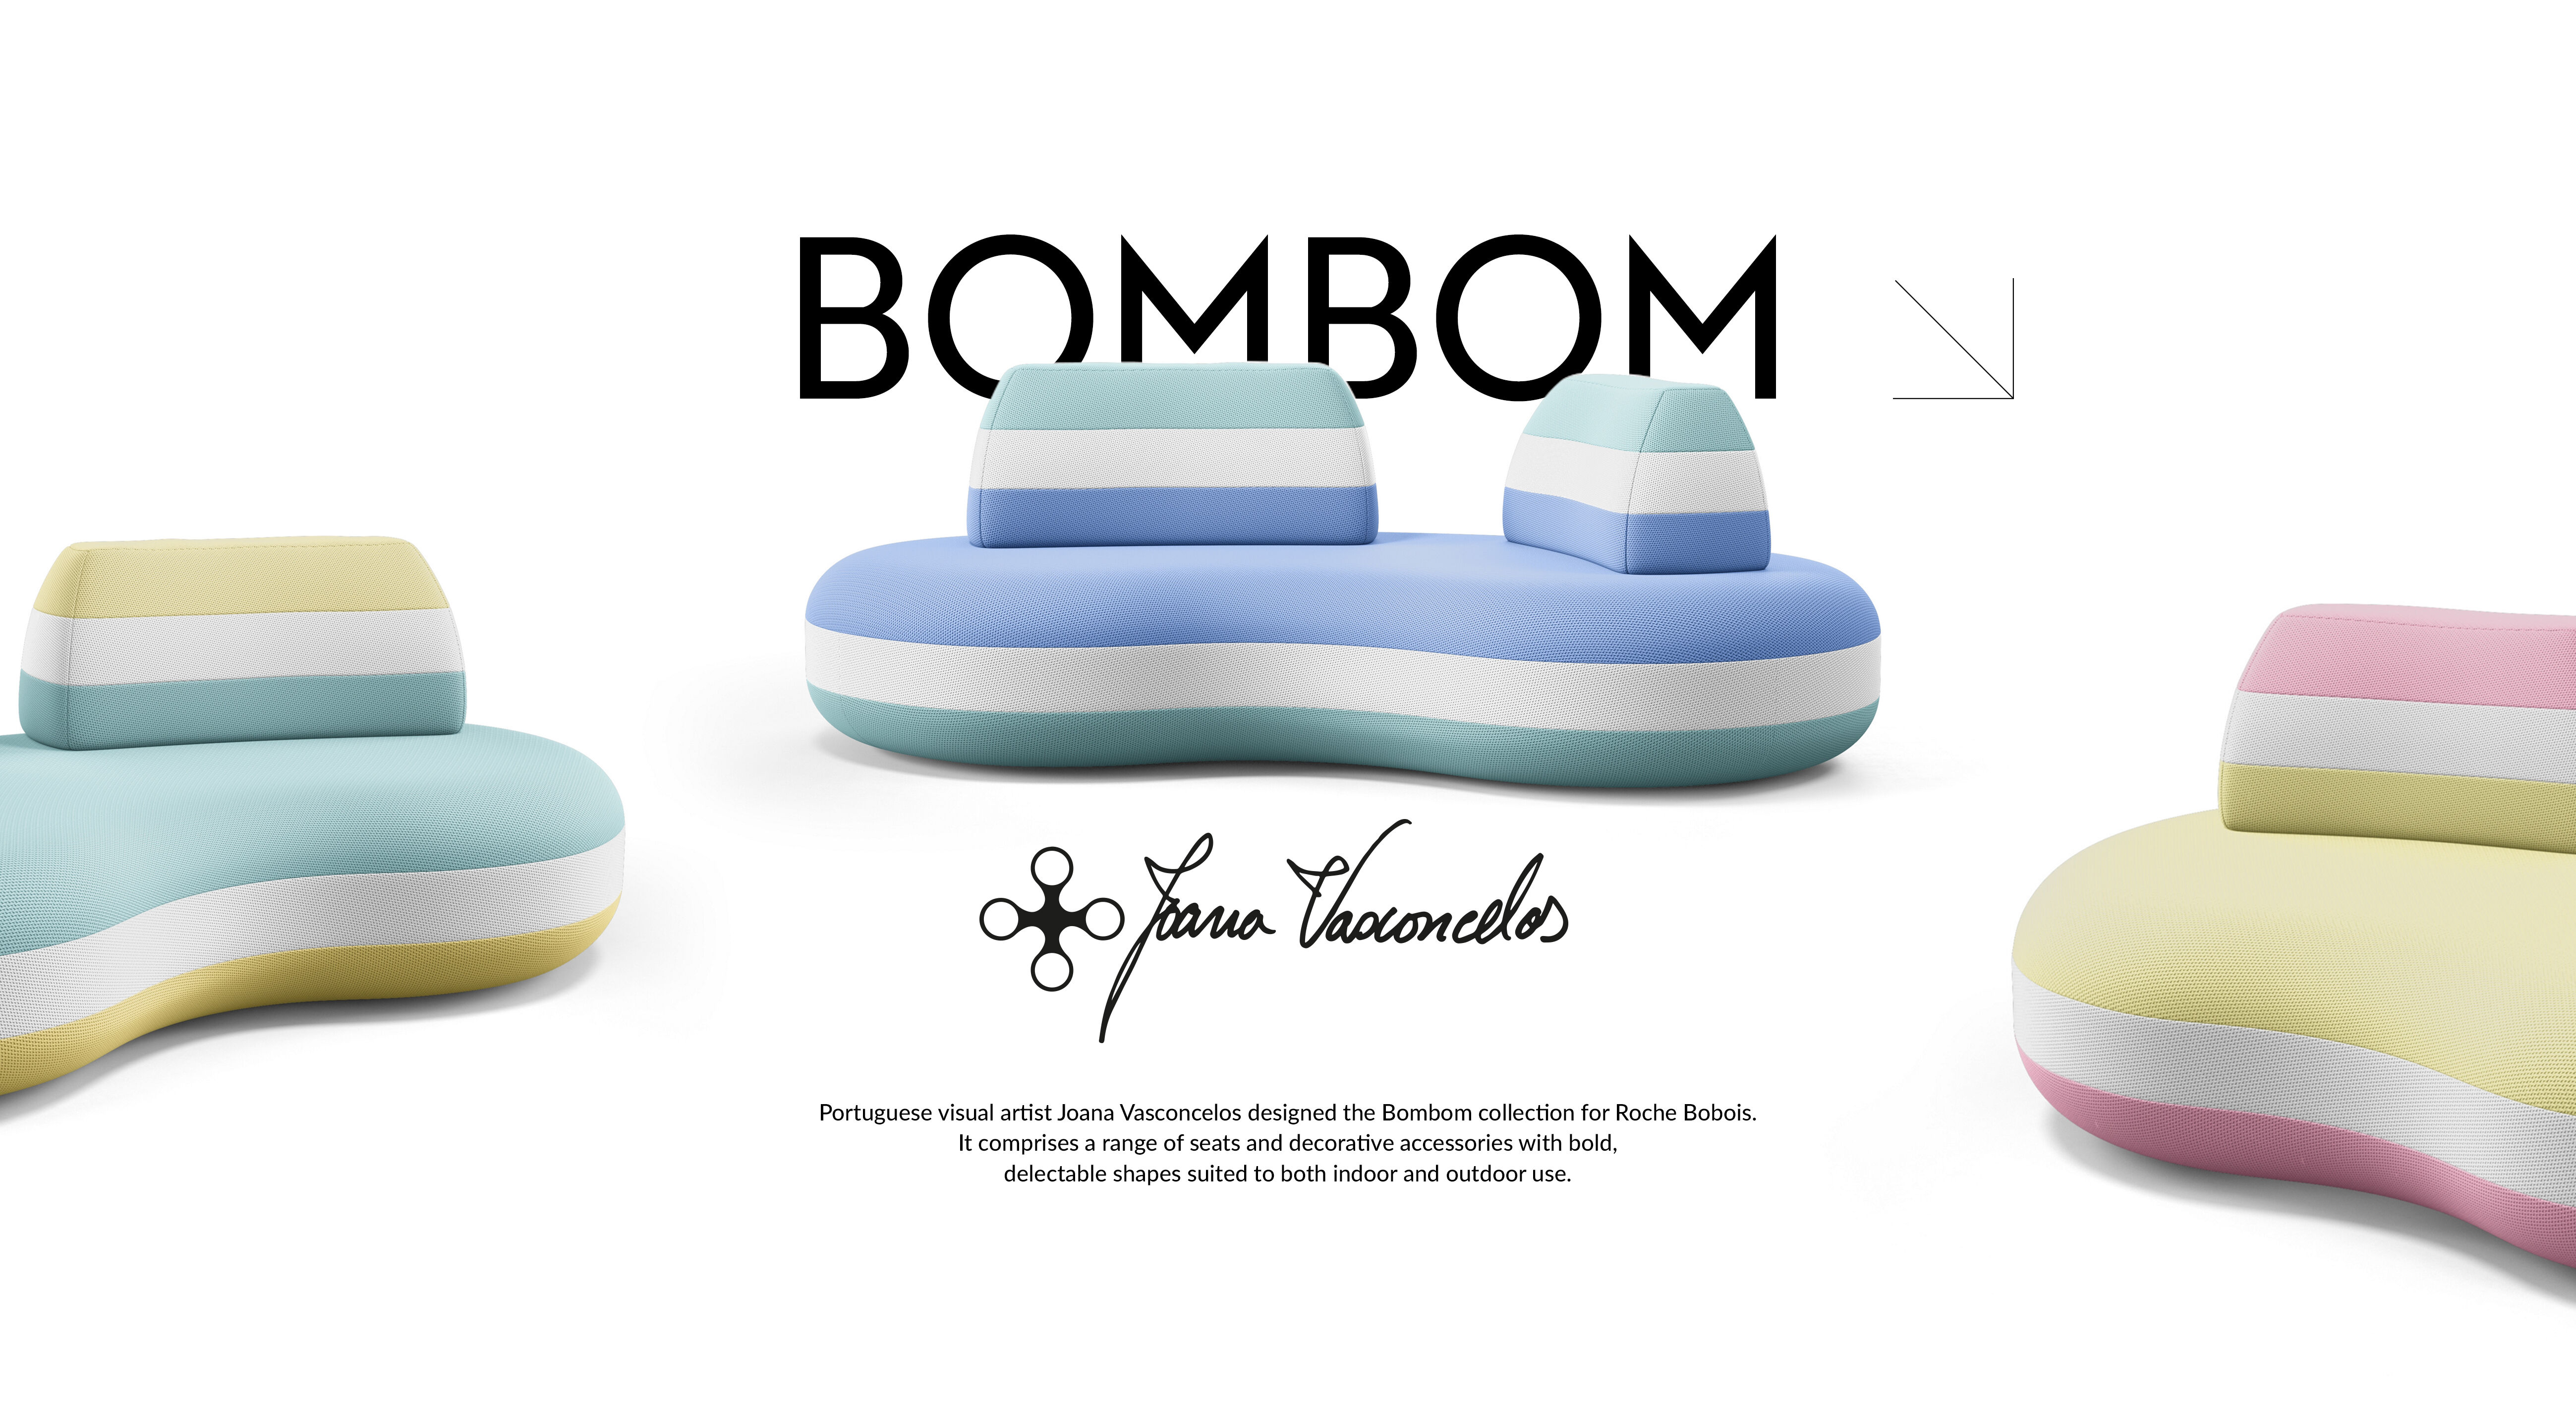 Portuguese visual artist Joana Vasconcelos designed the Bombom collection for Roche Bobois. It comprises a range of seats and decorative accessories with bold, delectable shapes suited to both indoor and outdoor use.